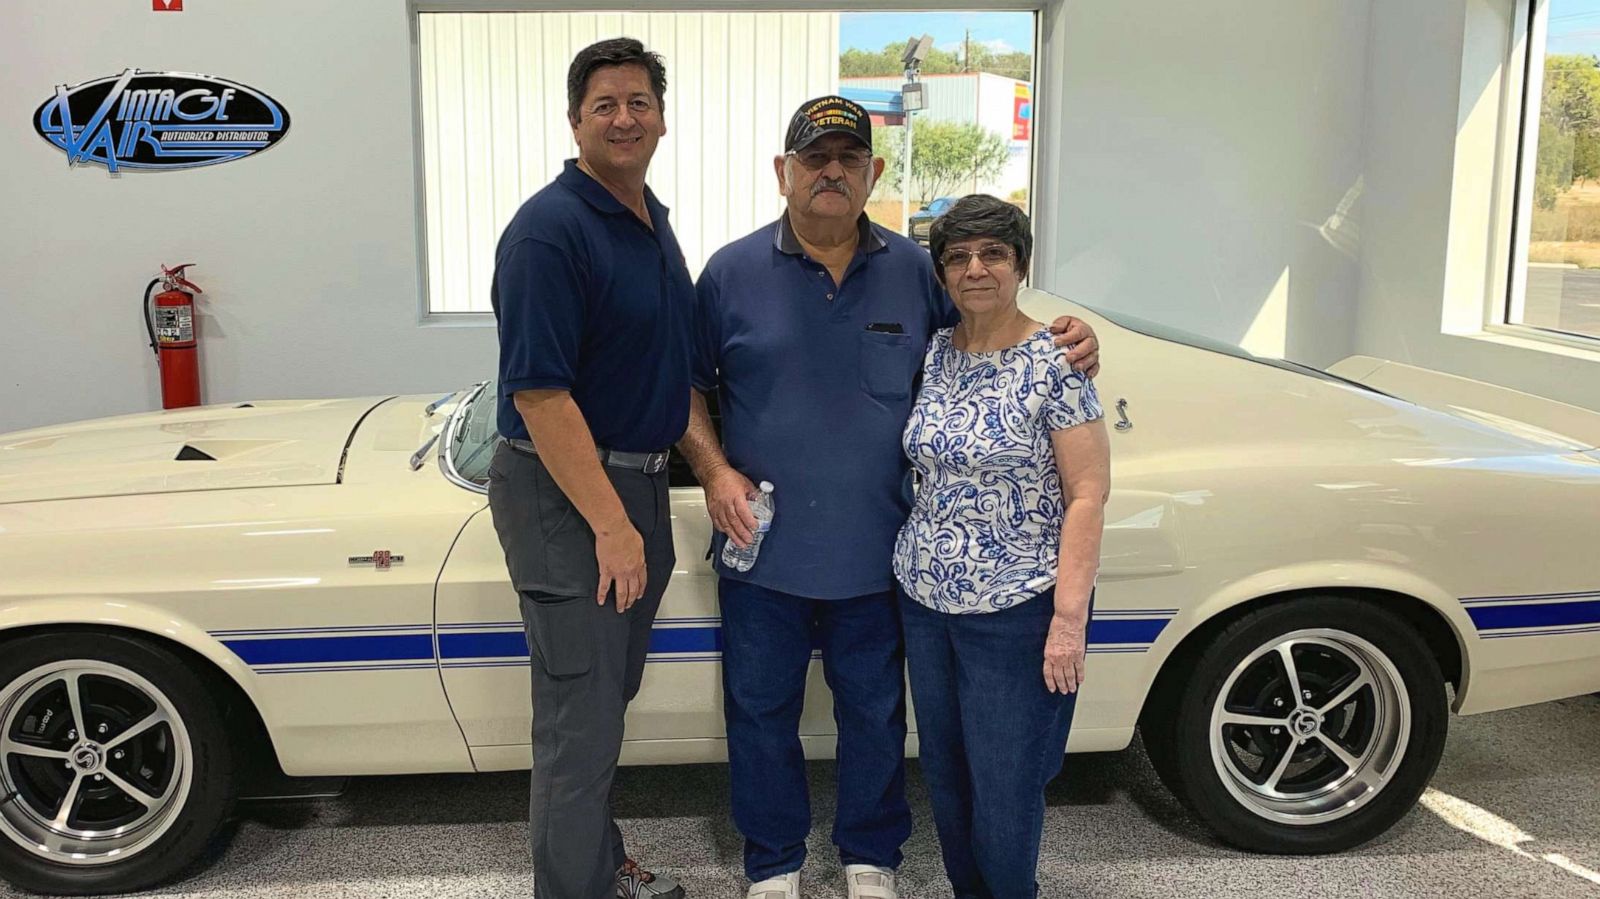 PHOTO: Rudy Quinones, owner of Renown Auto Restoration in San Antonio, is seen in a recent photo with Albert Brigas and his wife wife of 44 years, Sylvia Brigas.